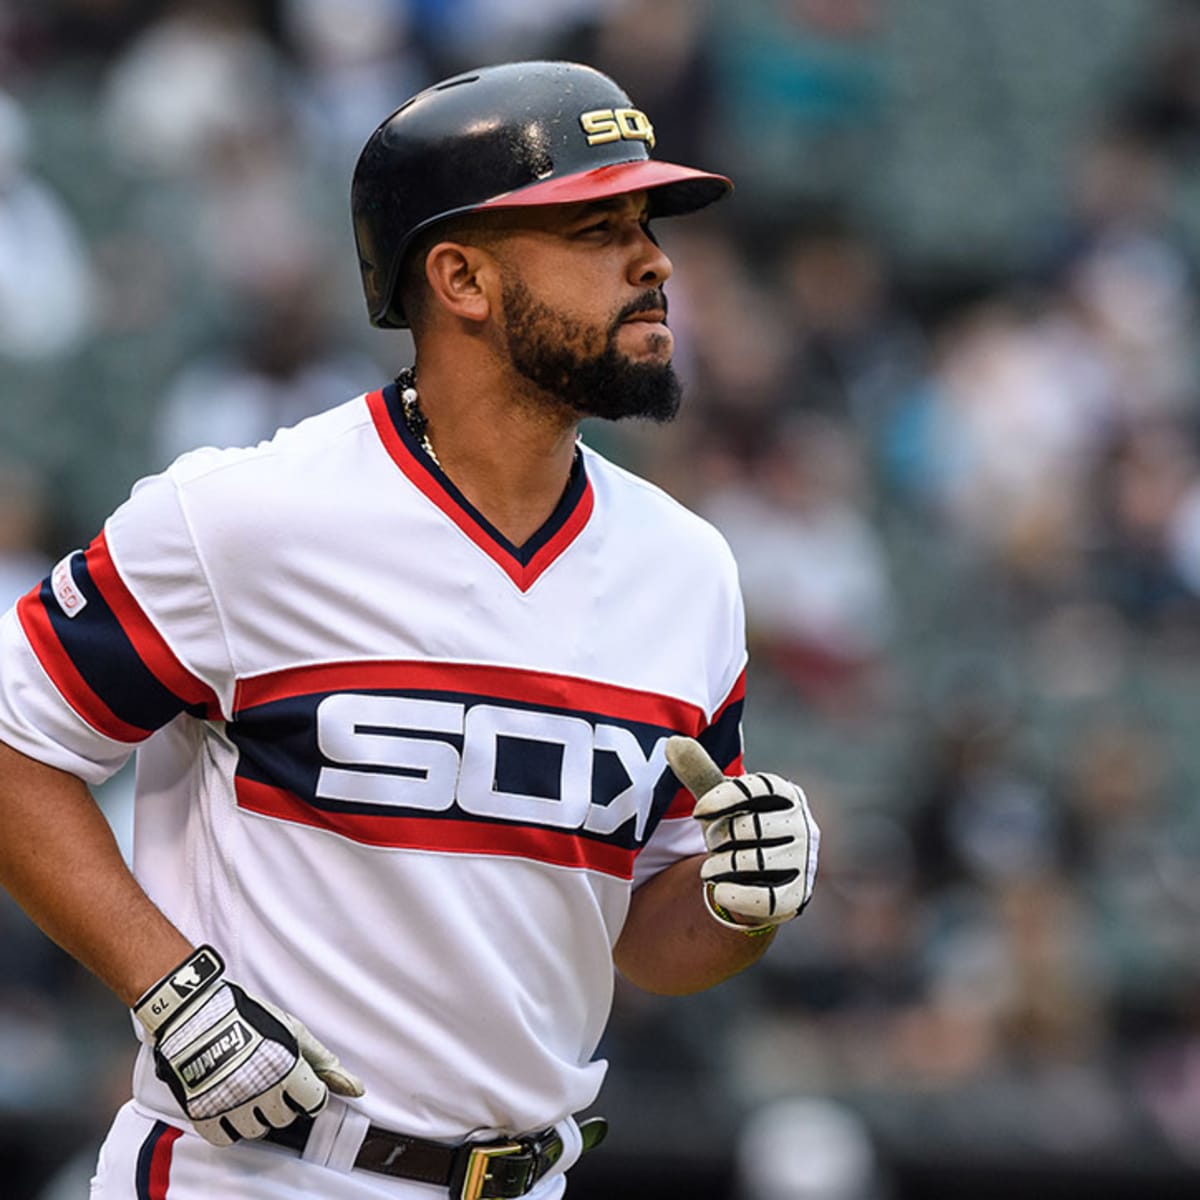 Chicago White Sox - Jose Abreu approved.